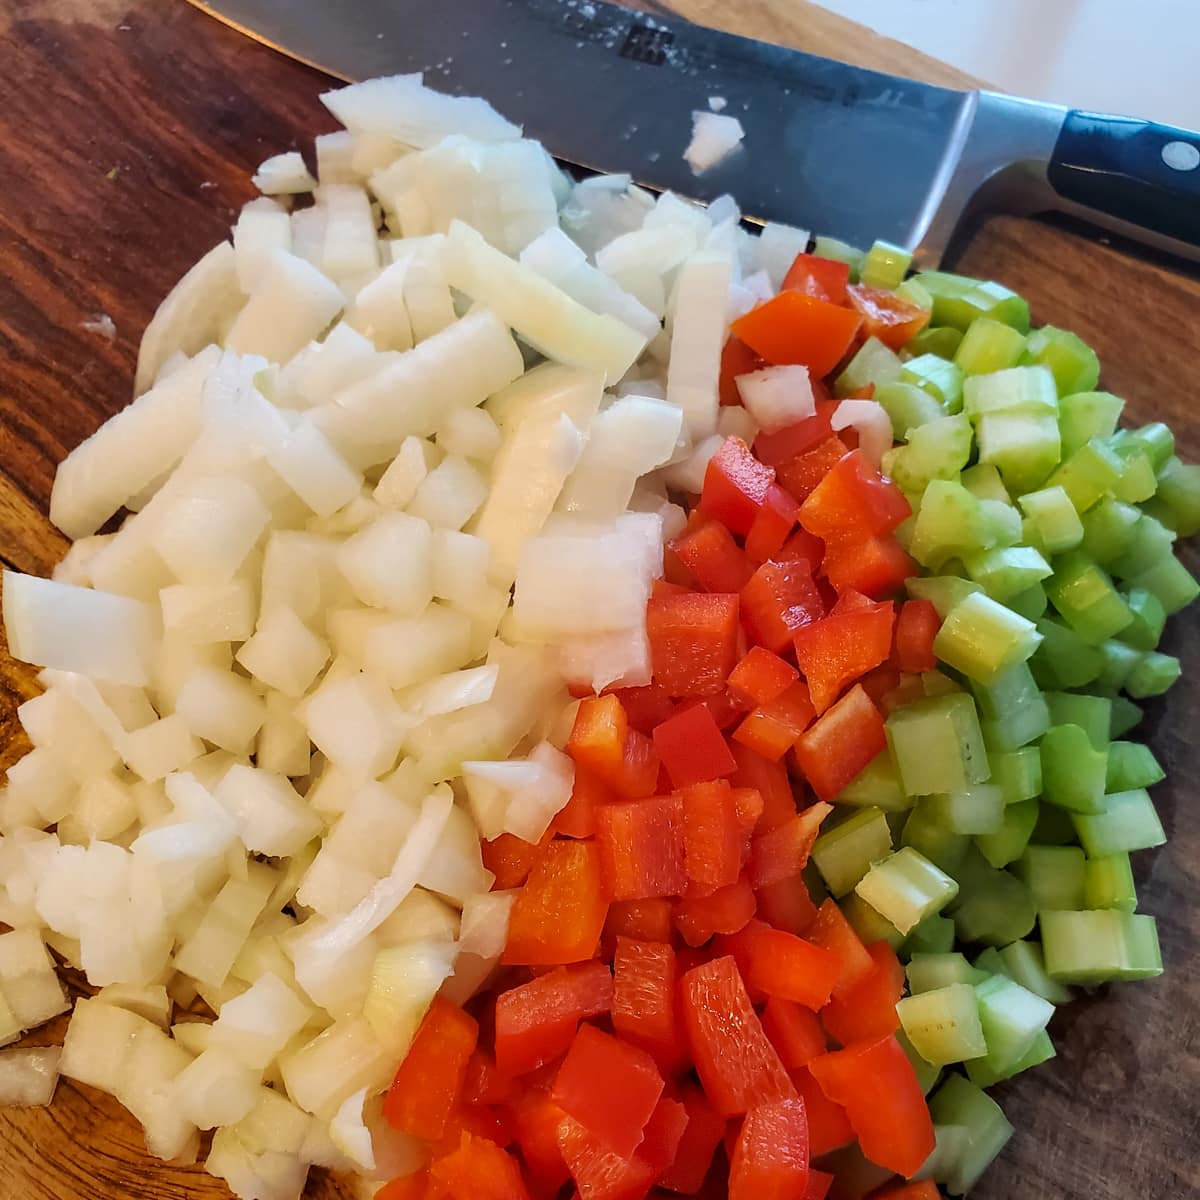 Diced onion, celery, and red bell pepper on a cutting board.